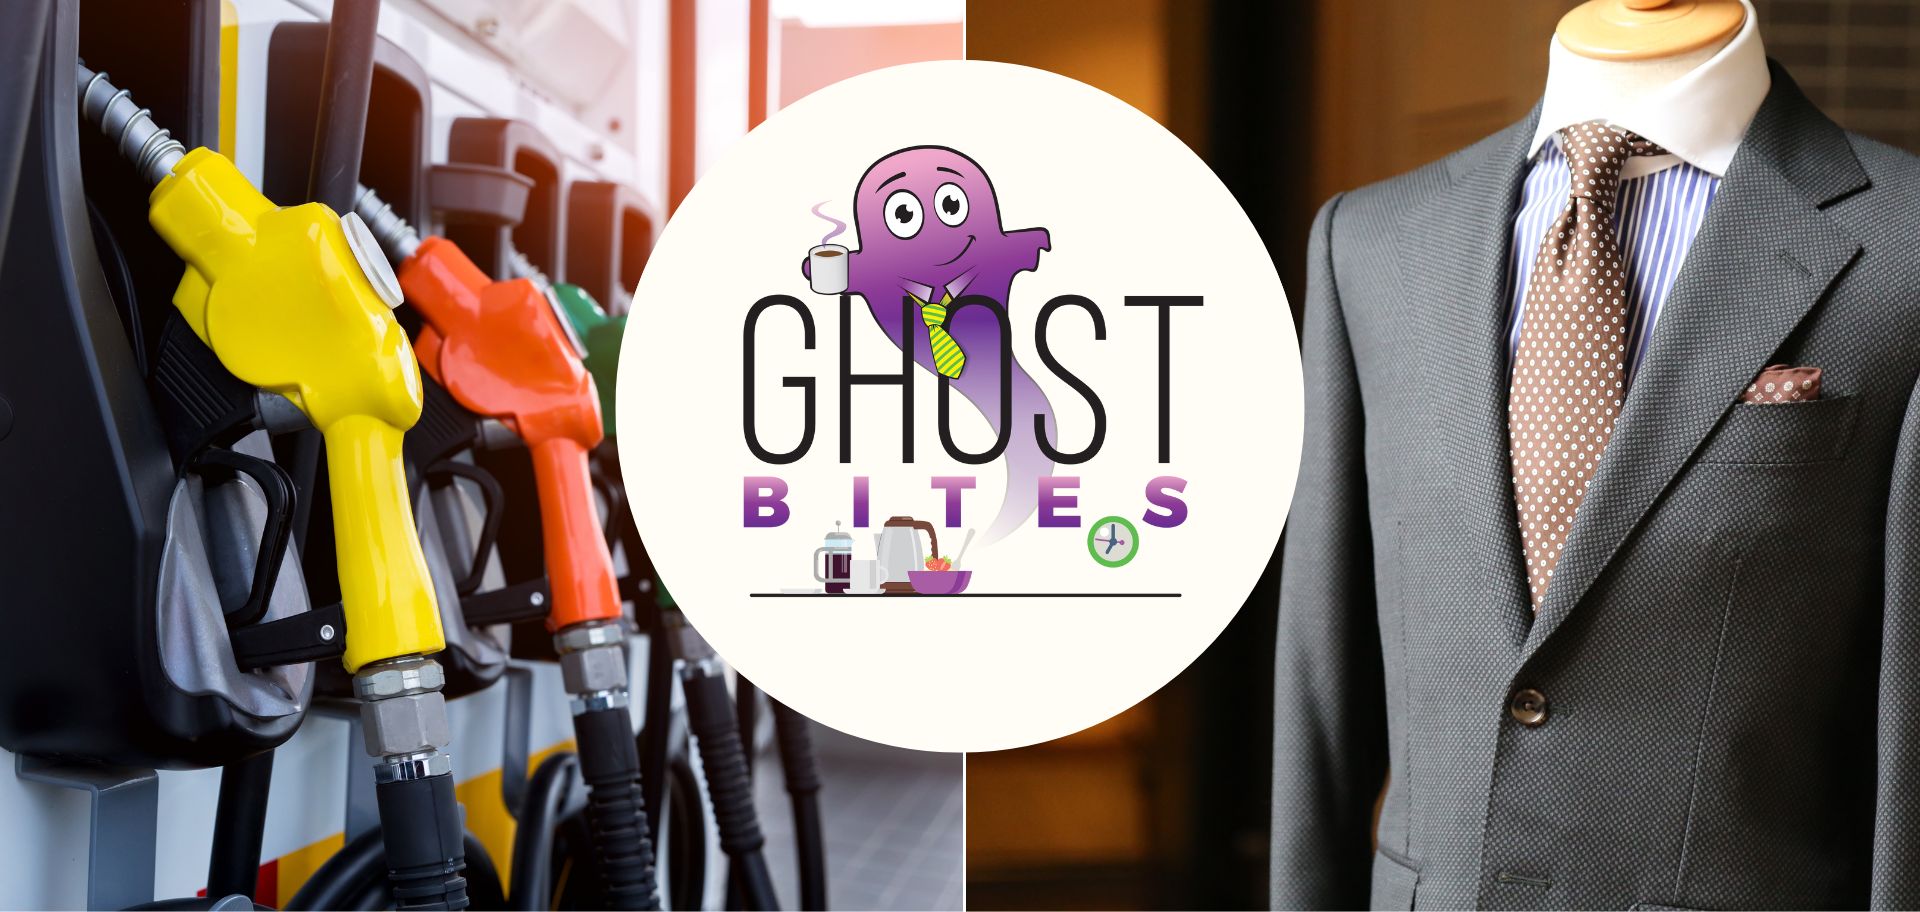 Ghost Bites (Afine | Anglo – BHP | Capital Appreciation | Delta | Emira | Nampak | Old Mutual | Trustco | Woolworths | Zeda)